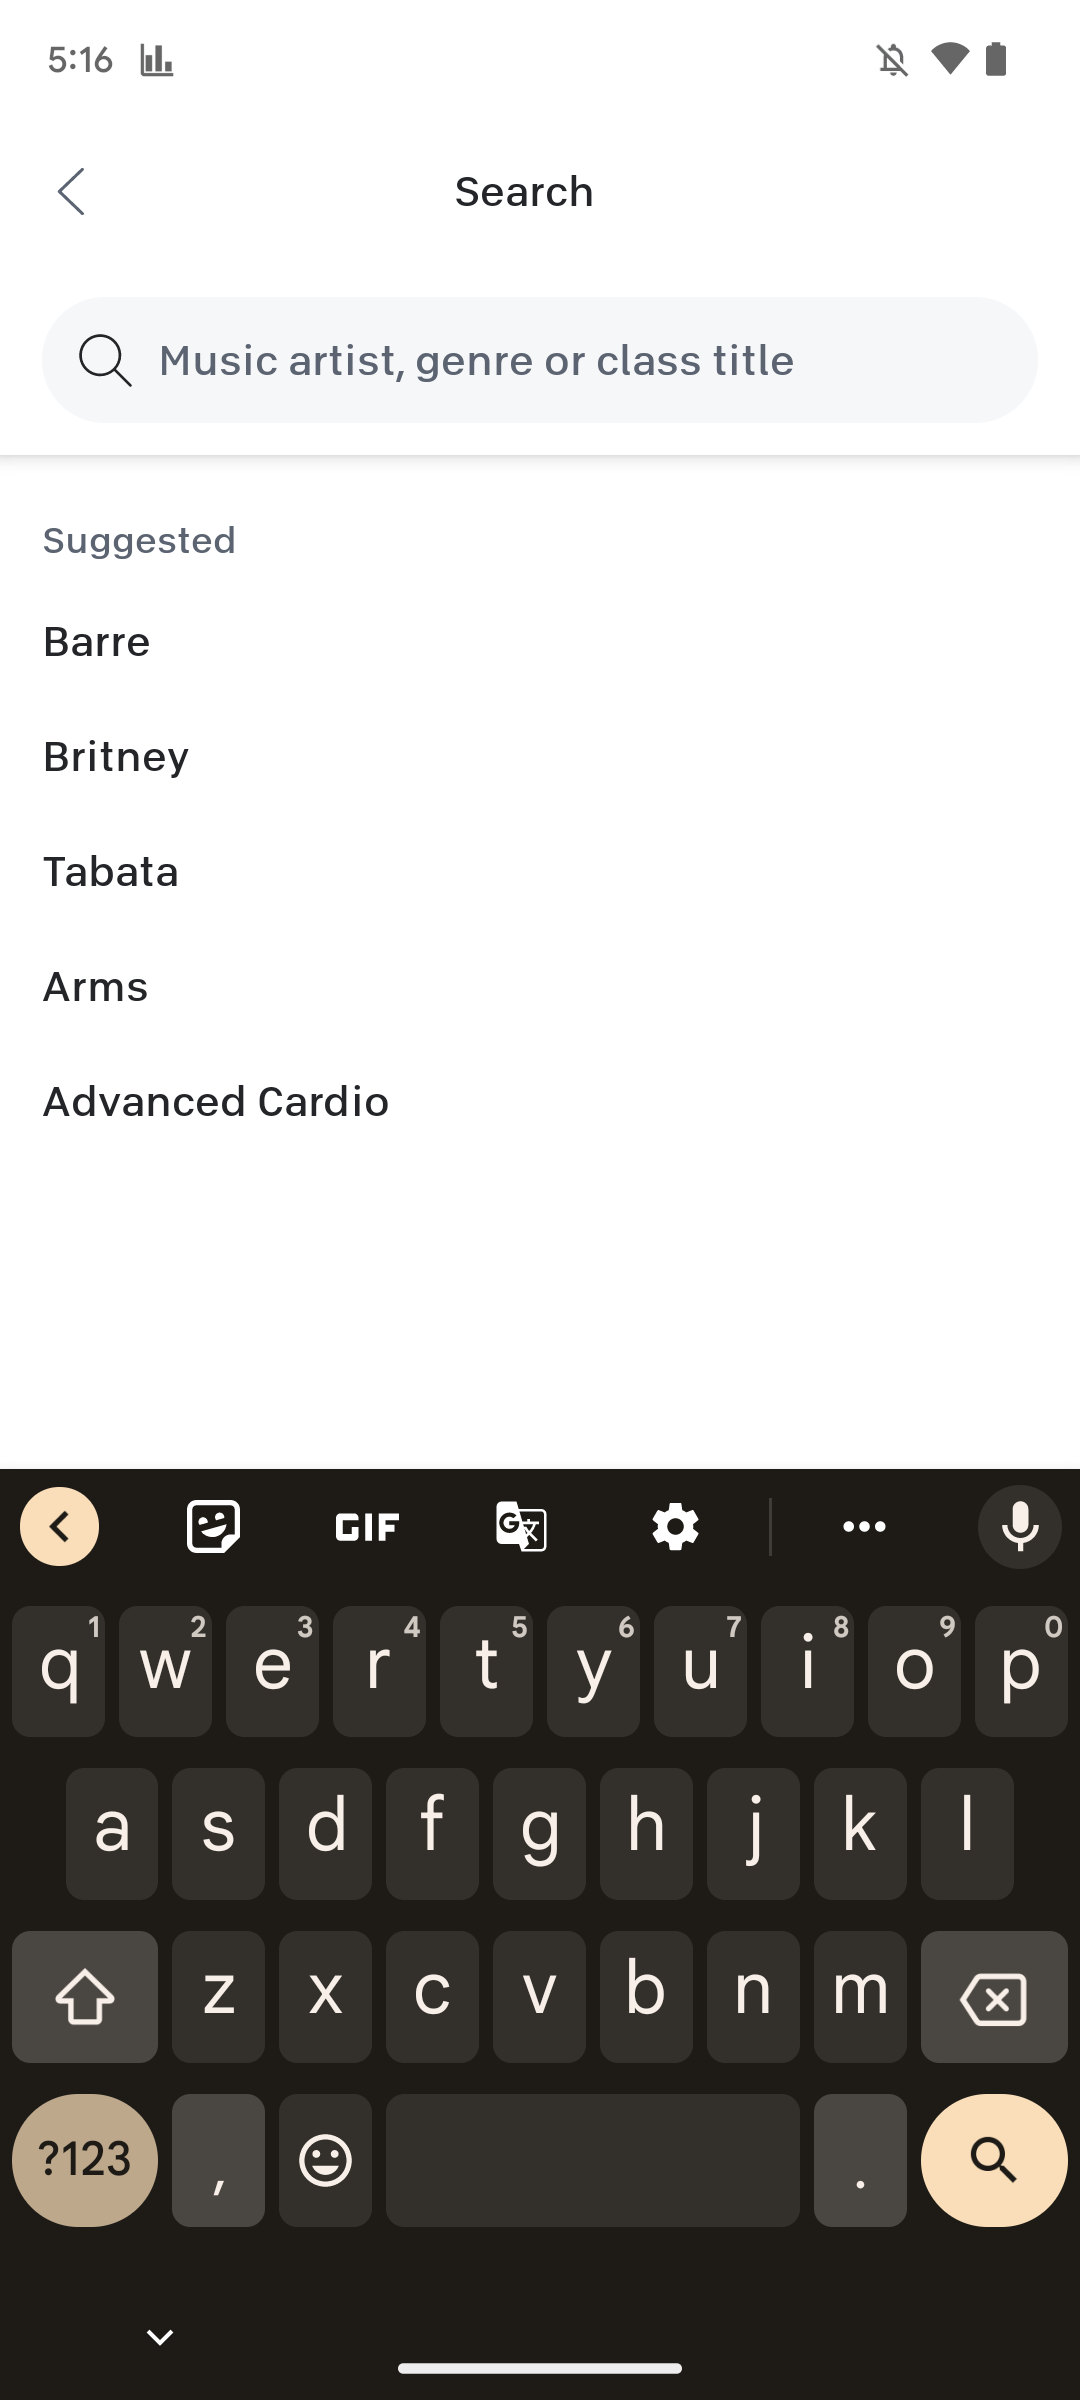 Expanded search box in Android app.